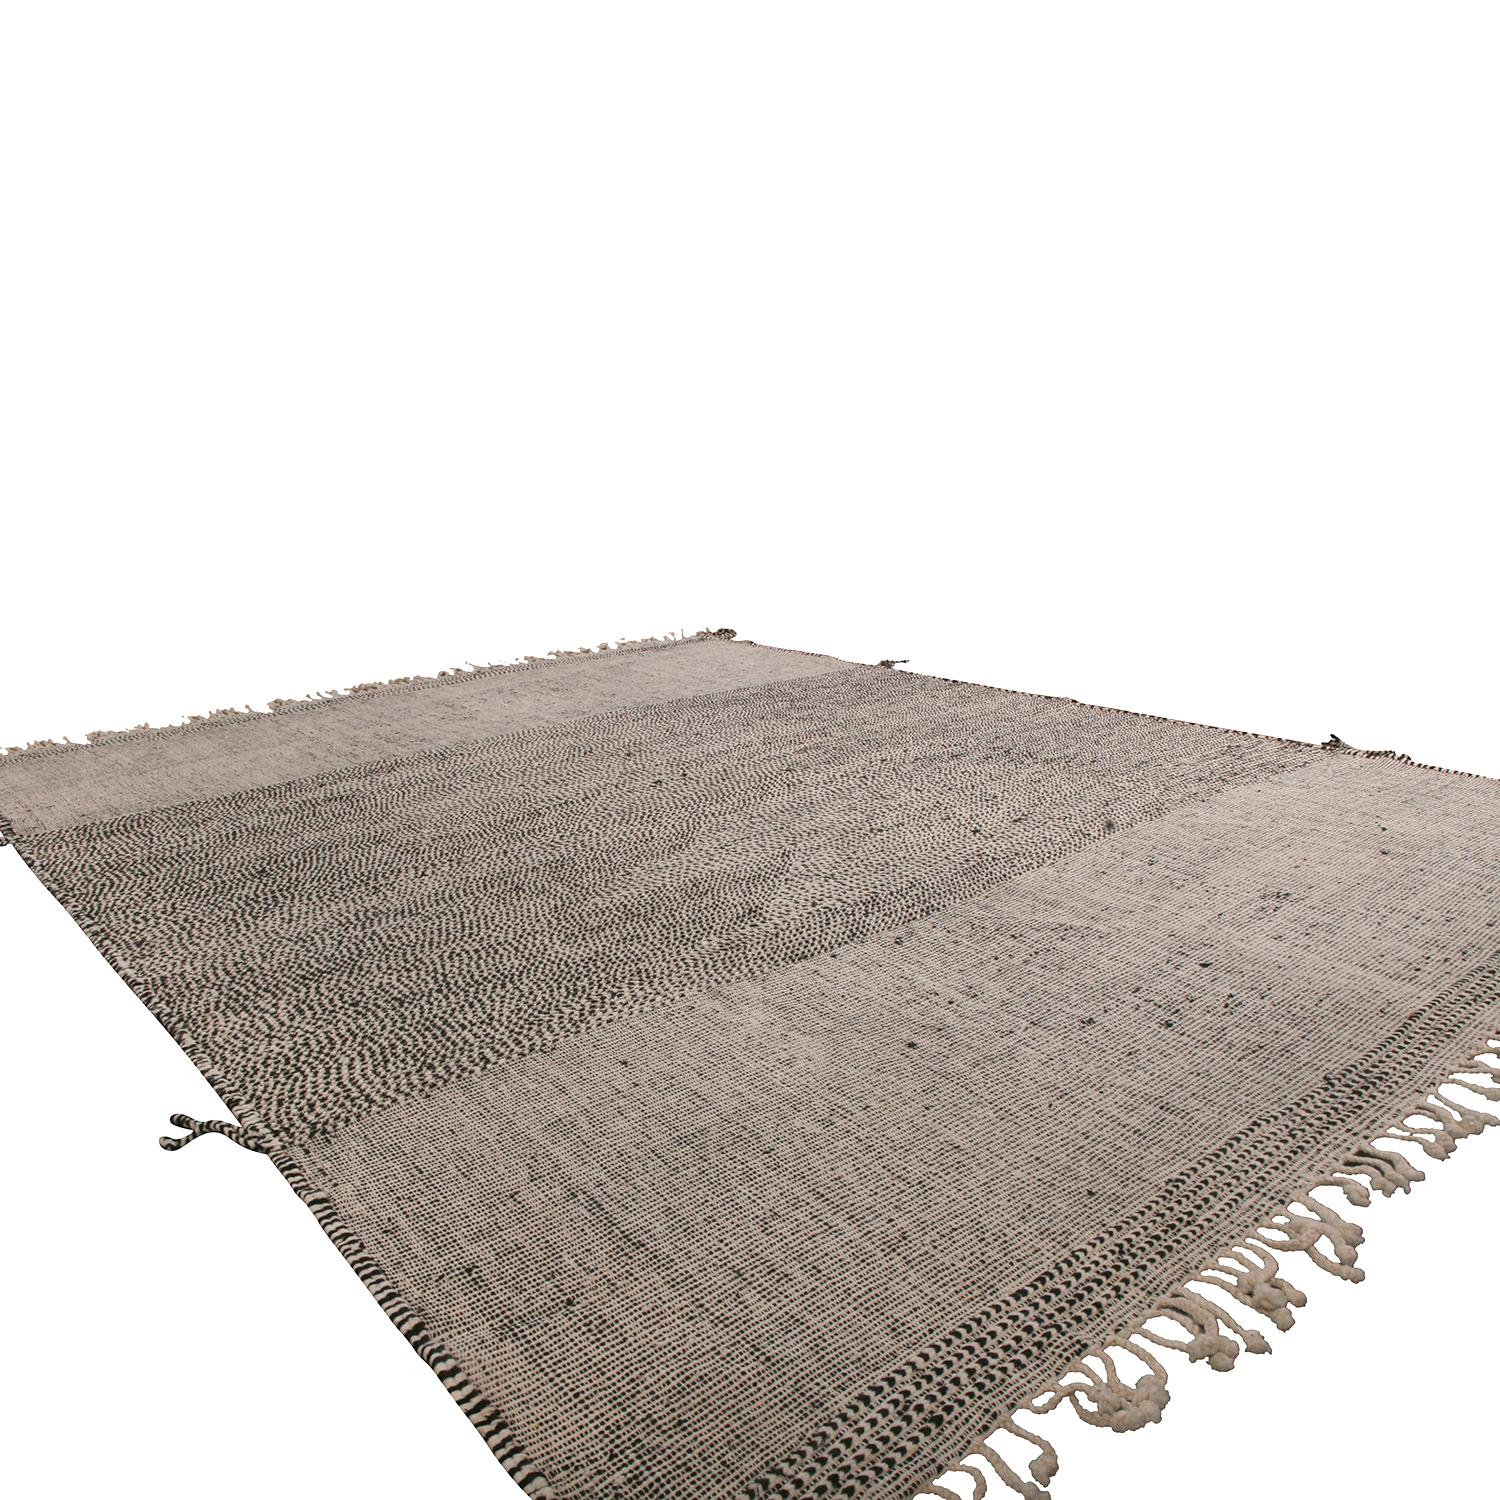 This addition to Rug & Kilim’s extensive contemporary and modern rug collection recaptures the inspiration of a classic Moroccan Berber rug in new large-scale and textural high-low production. The thick braiding at the playful fringes, borders and